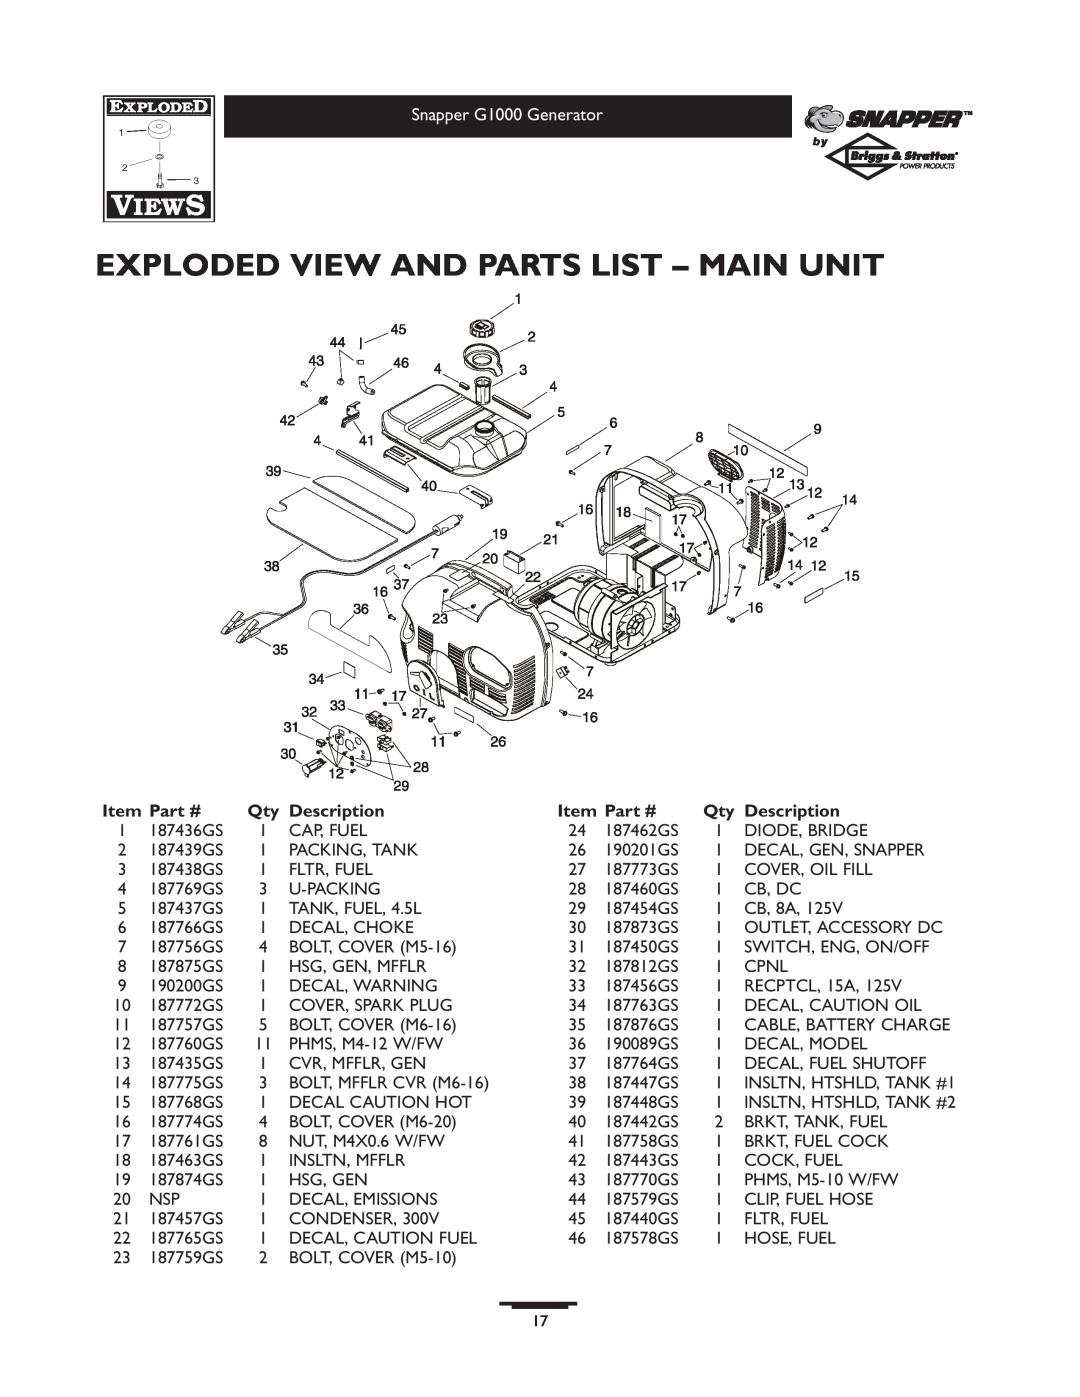 Snapper 1666-0 owner manual Exploded View And Parts List - Main Unit, Outlet, Accessory Dc, Cable, Battery Charge 